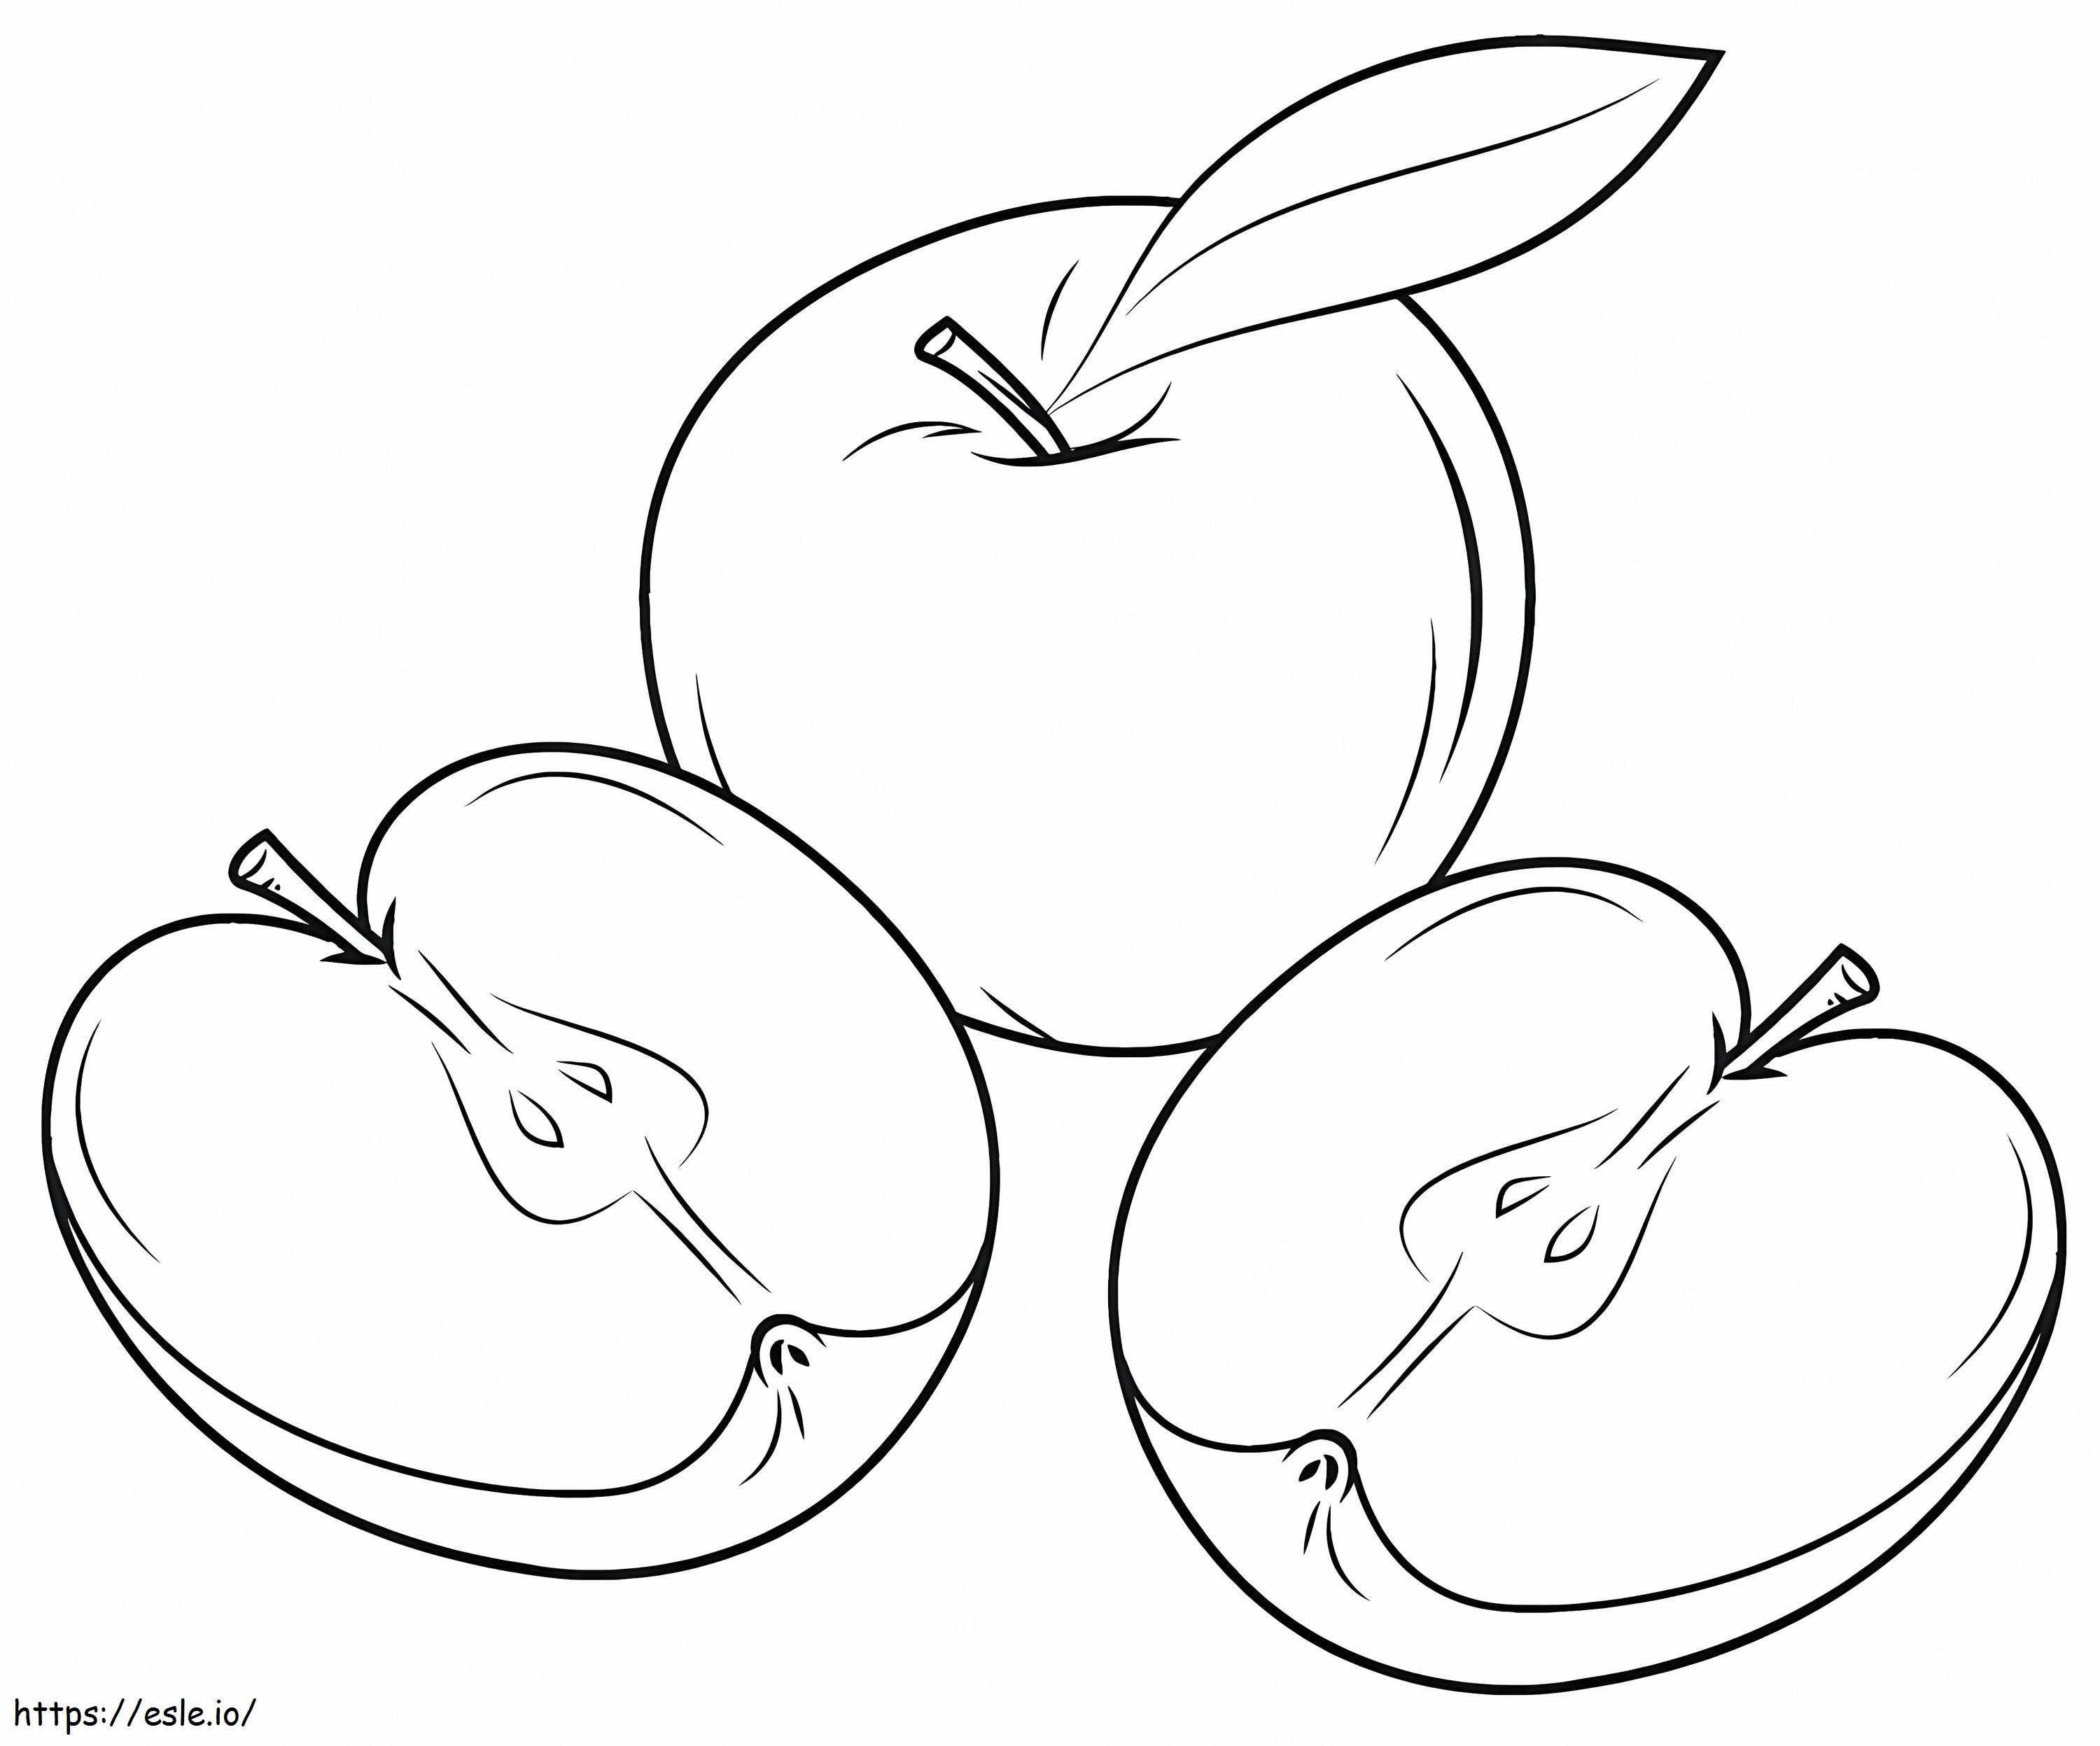 One Apple And Two Apple Slices coloring page